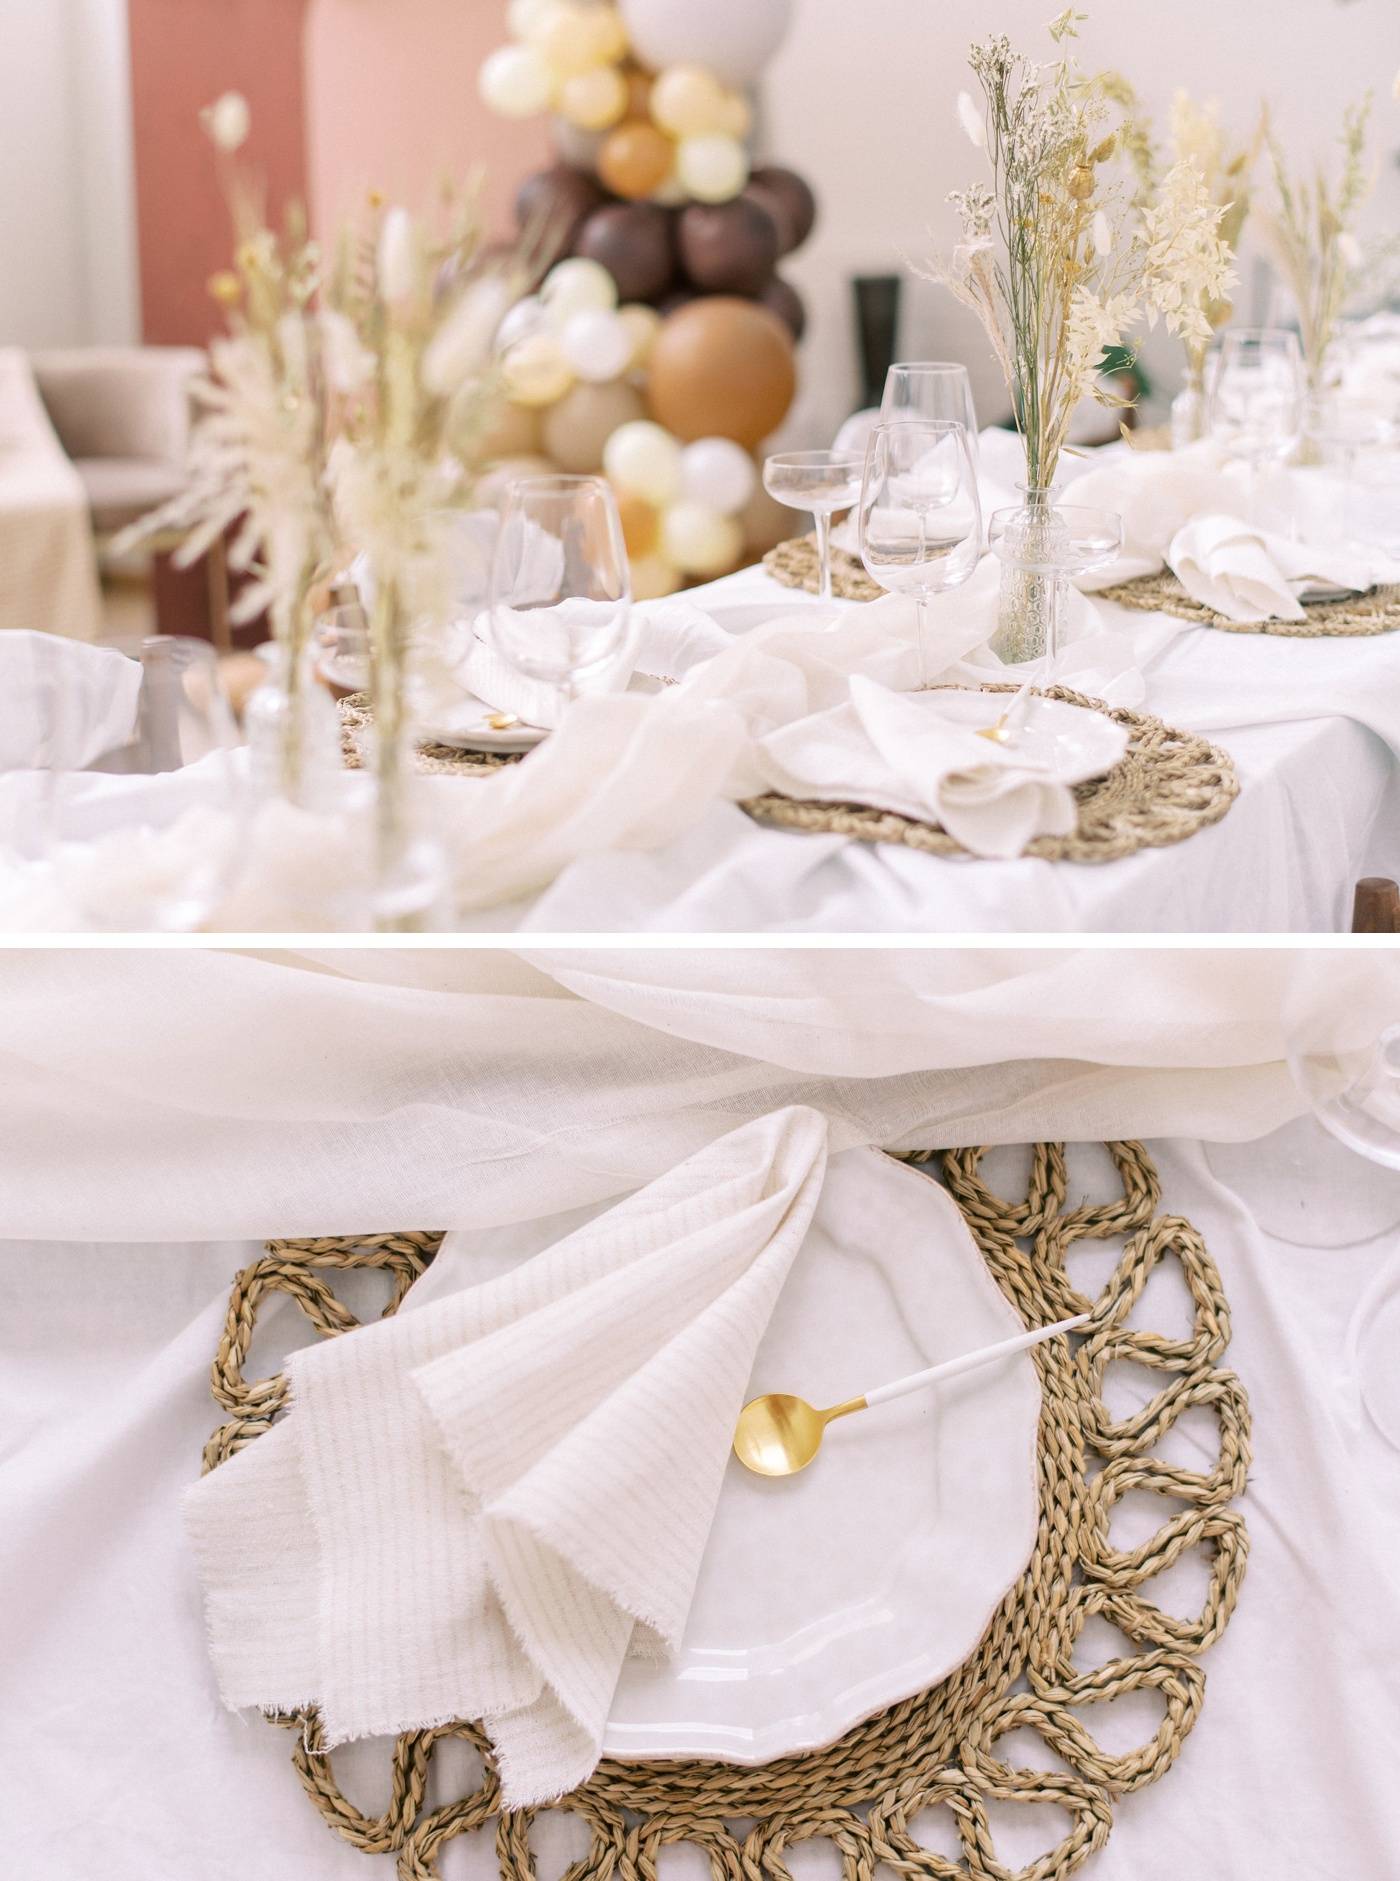 Baby shower table settings with white linens and seagrass flower placemats